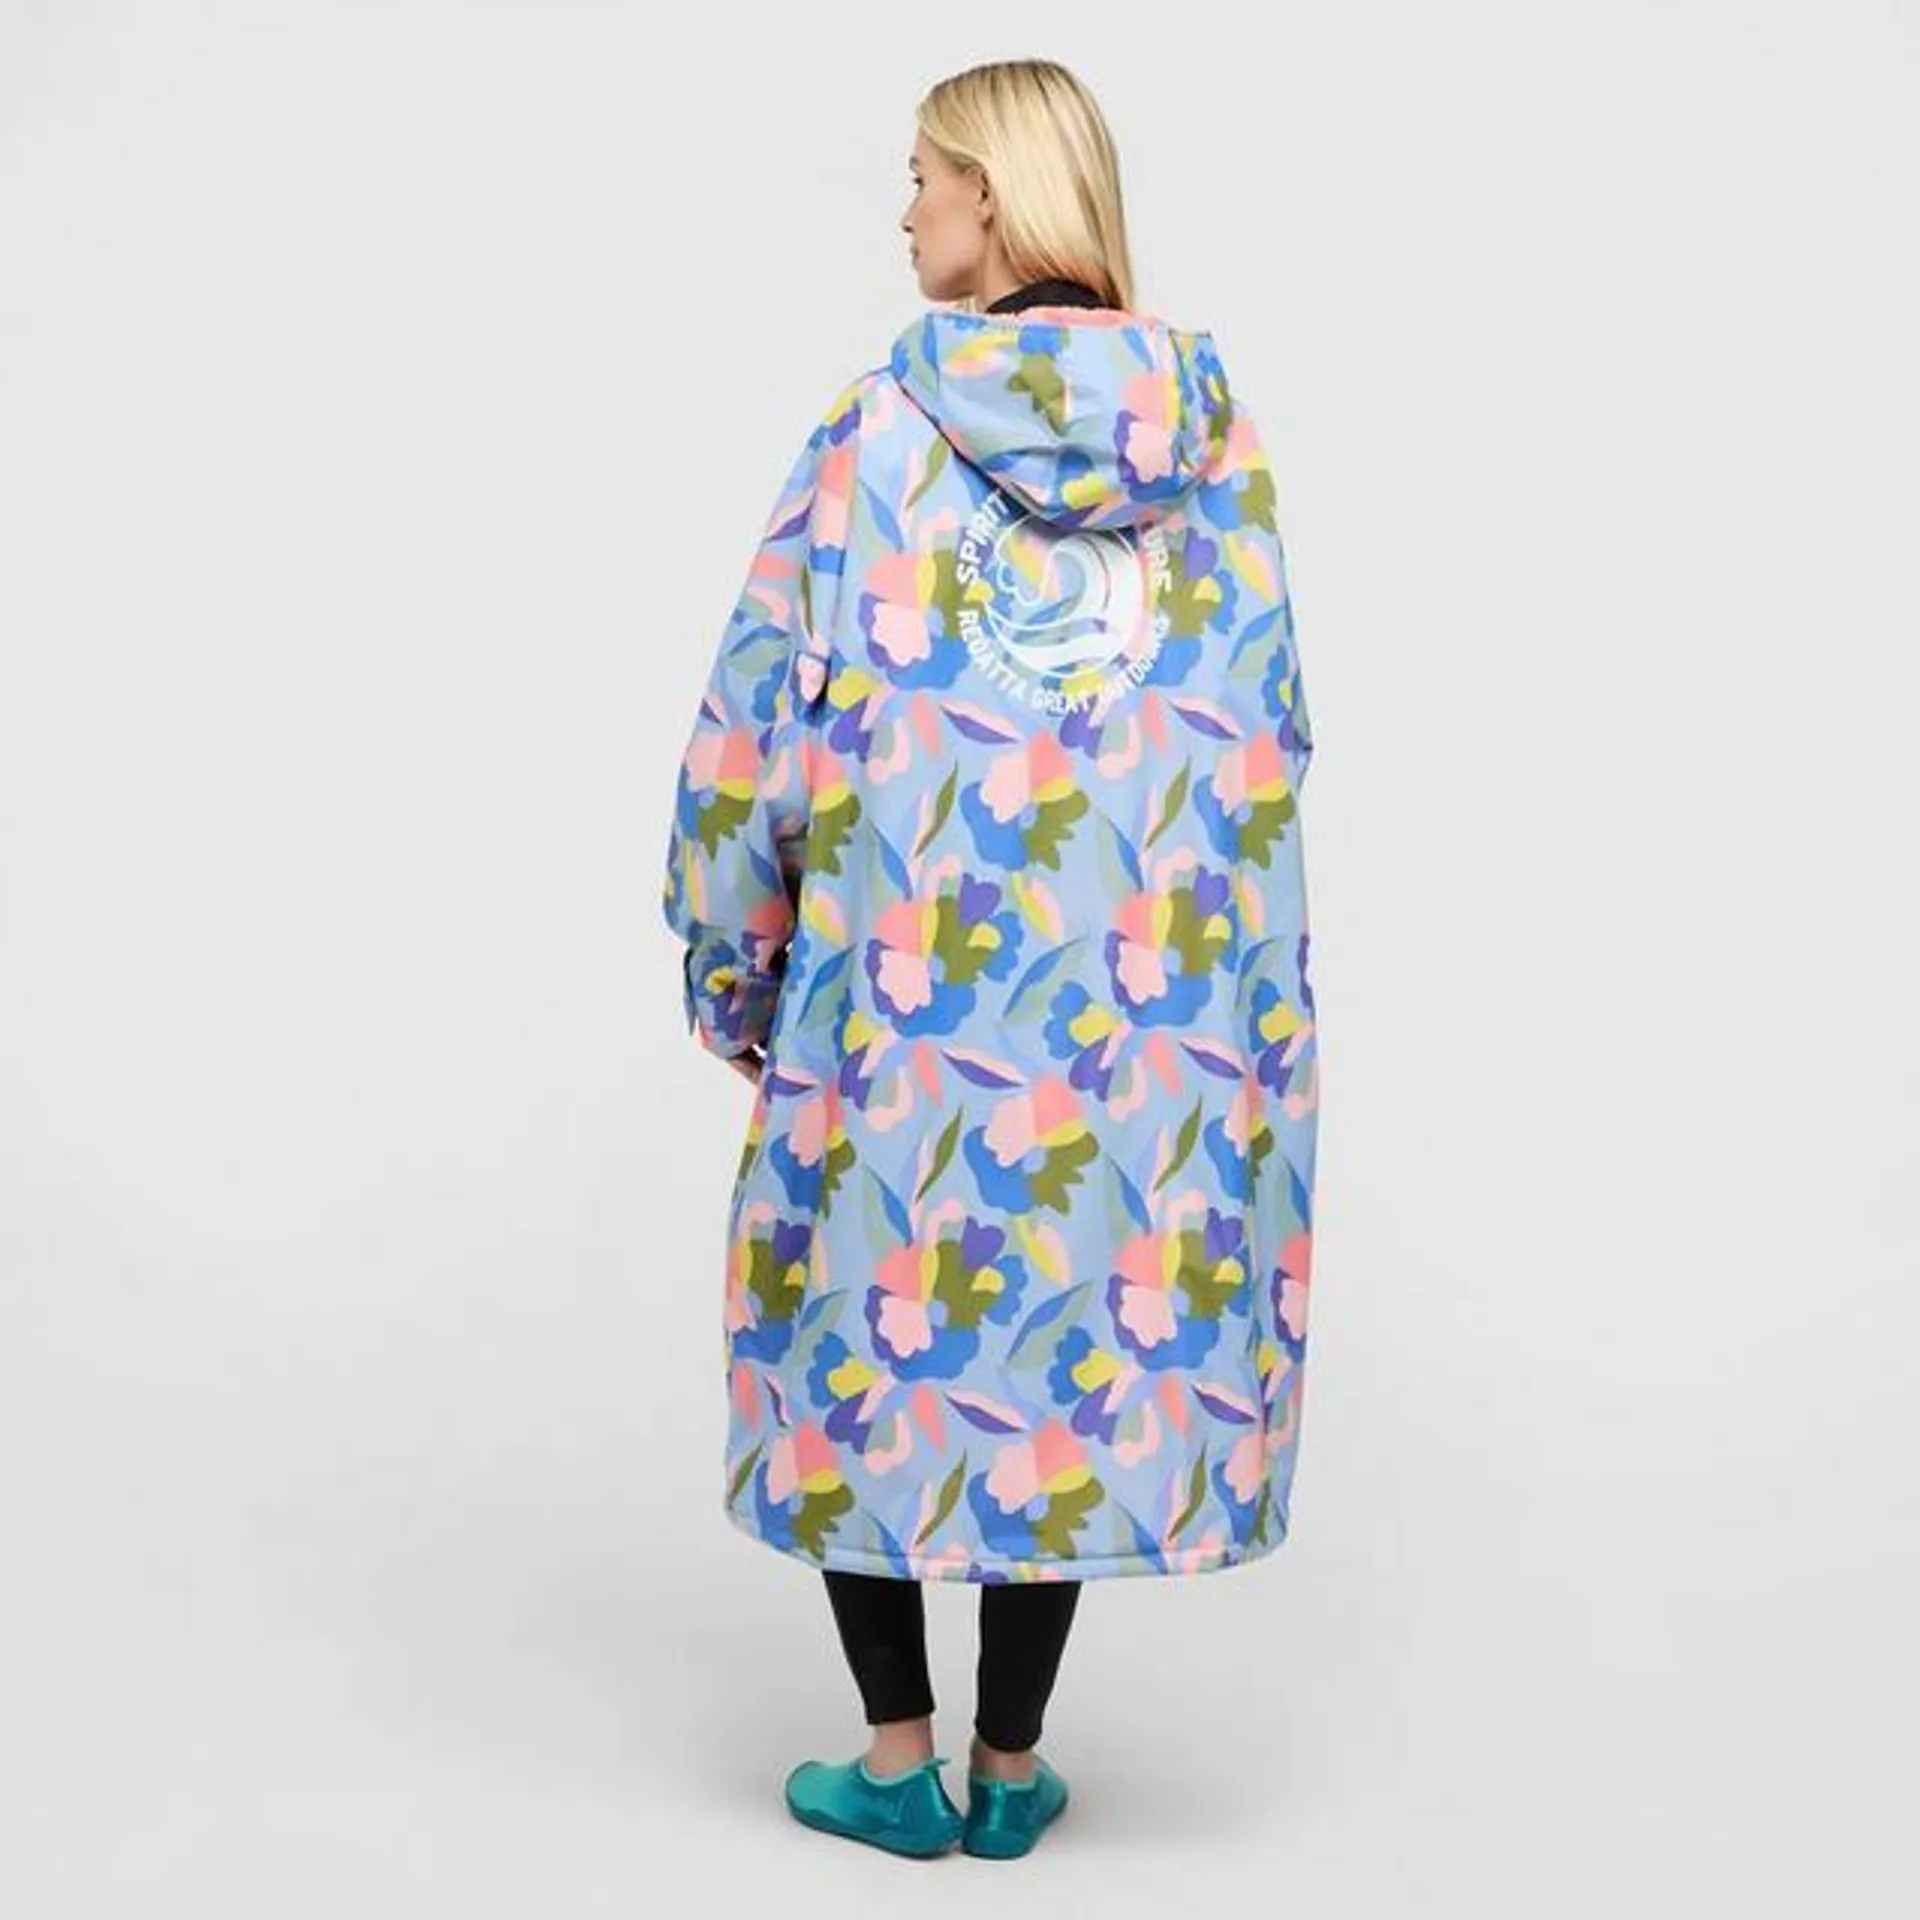 Adults Waterproof Robe Abstract Floral Print